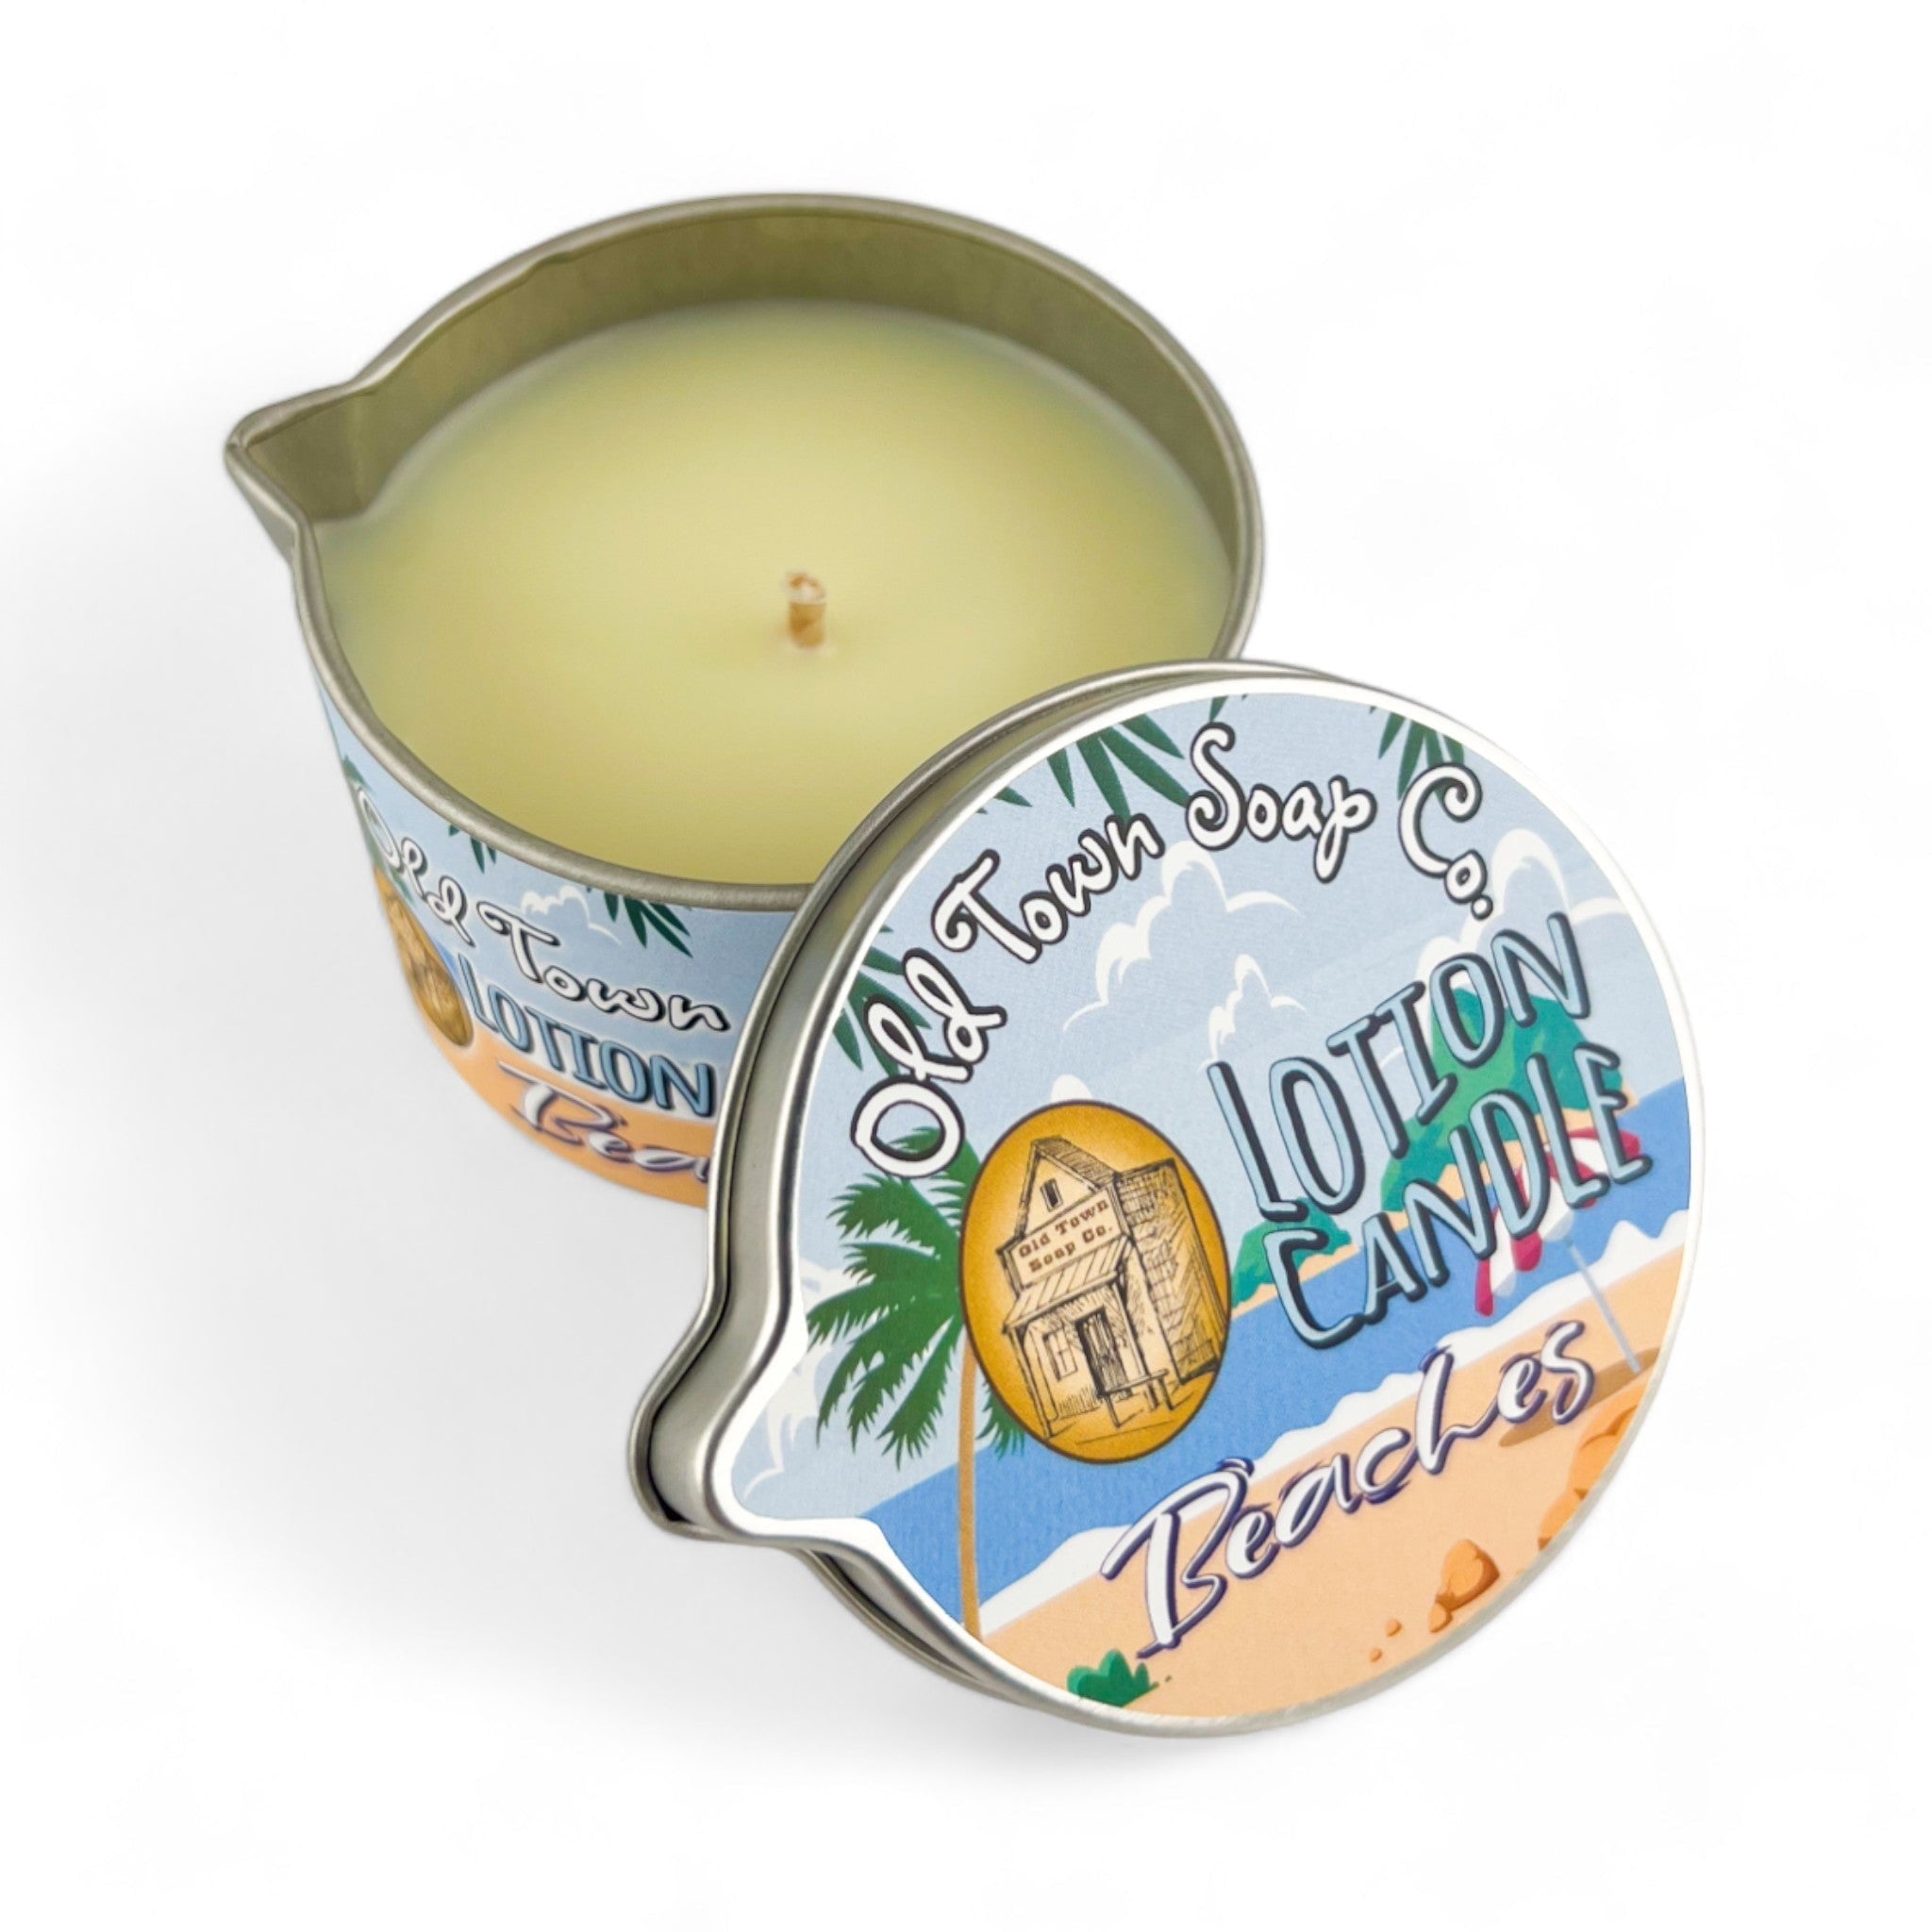 Beaches -Lotion Candles - Old Town Soap Co.